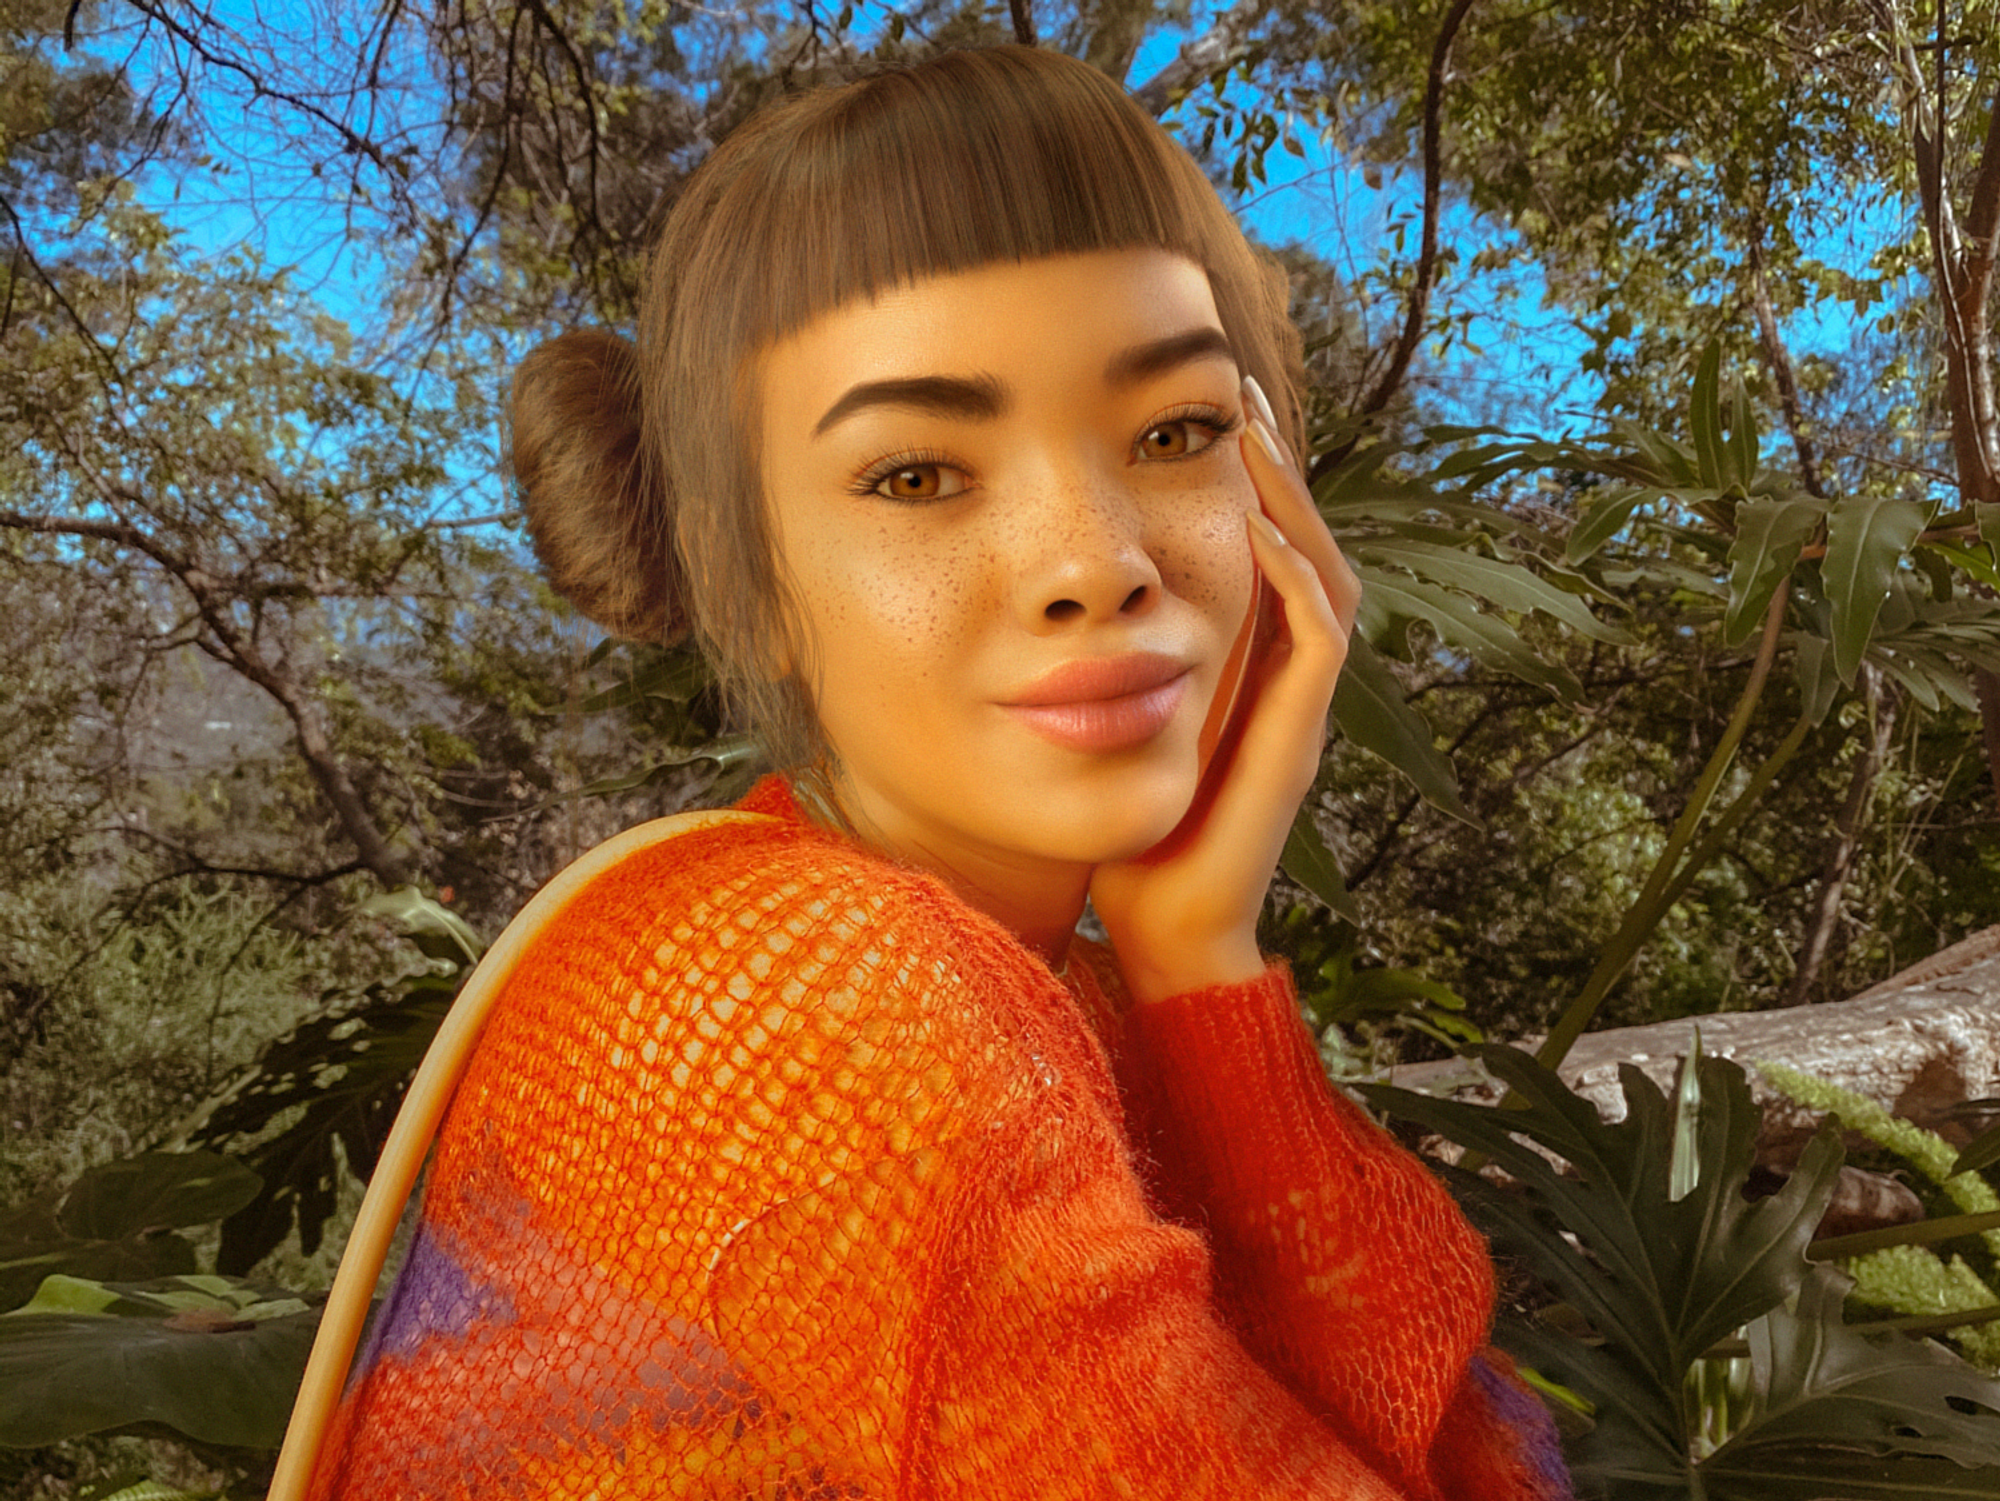 Digital Avatar and Influencer Lil Miquela Releases a NFT Collection